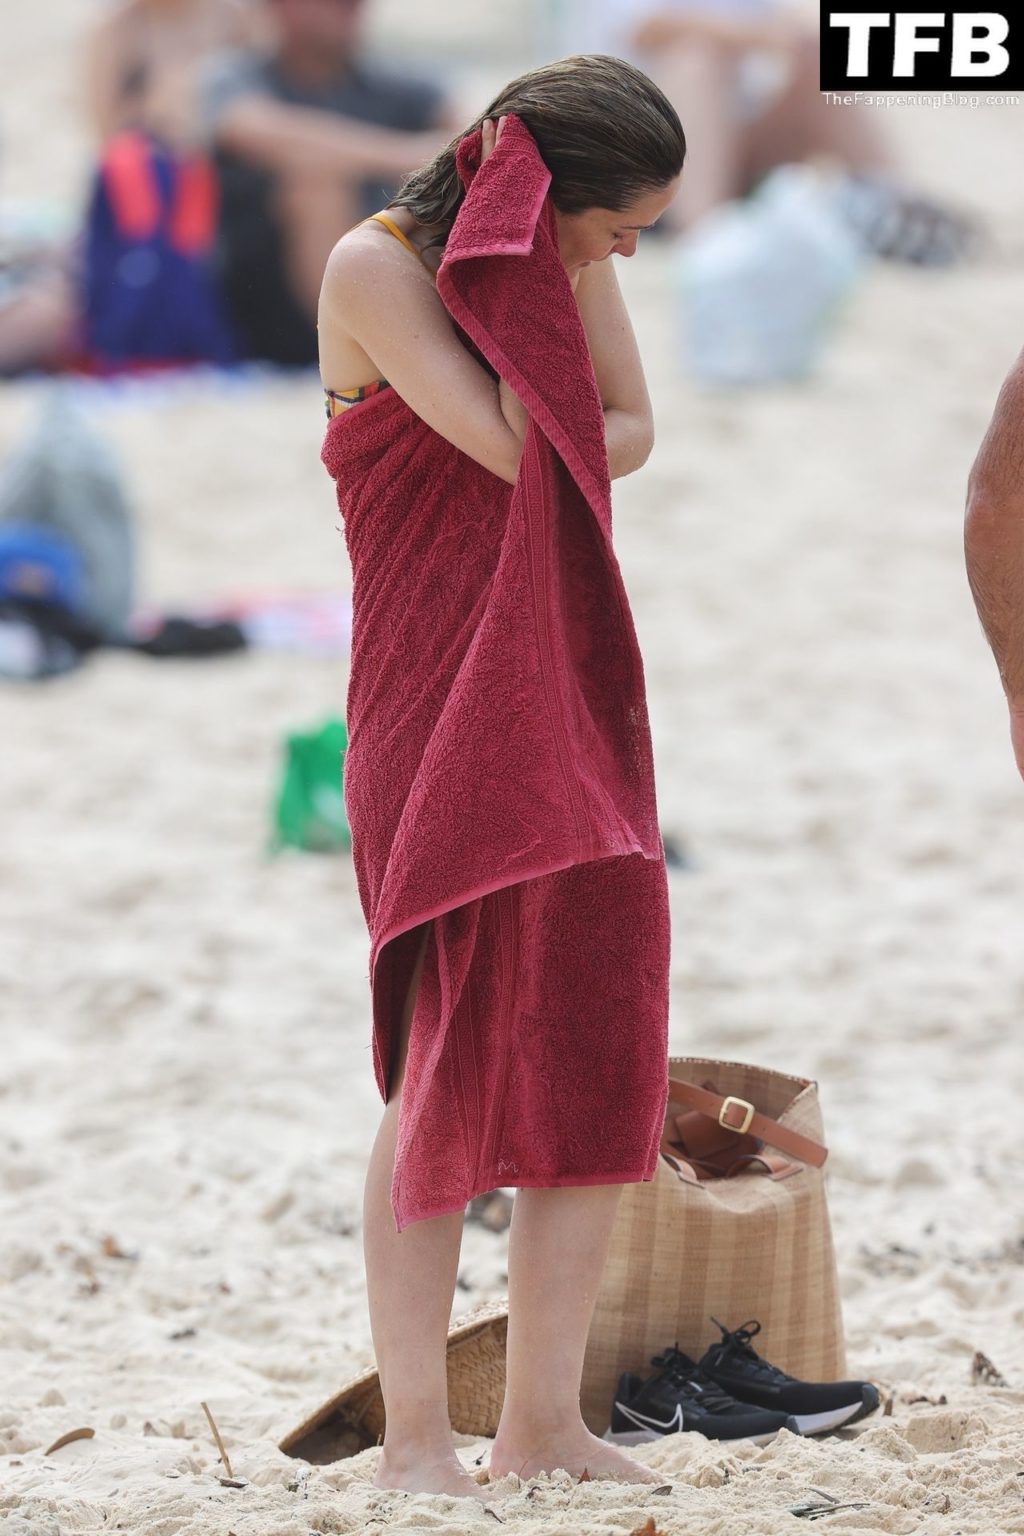 Rose Byrne Sexy The Fappening Blog 82 1024x1536 - Rose Byrne & Kick Gurry Enjoy a Day on the Beach in Sydney (90 Photos)